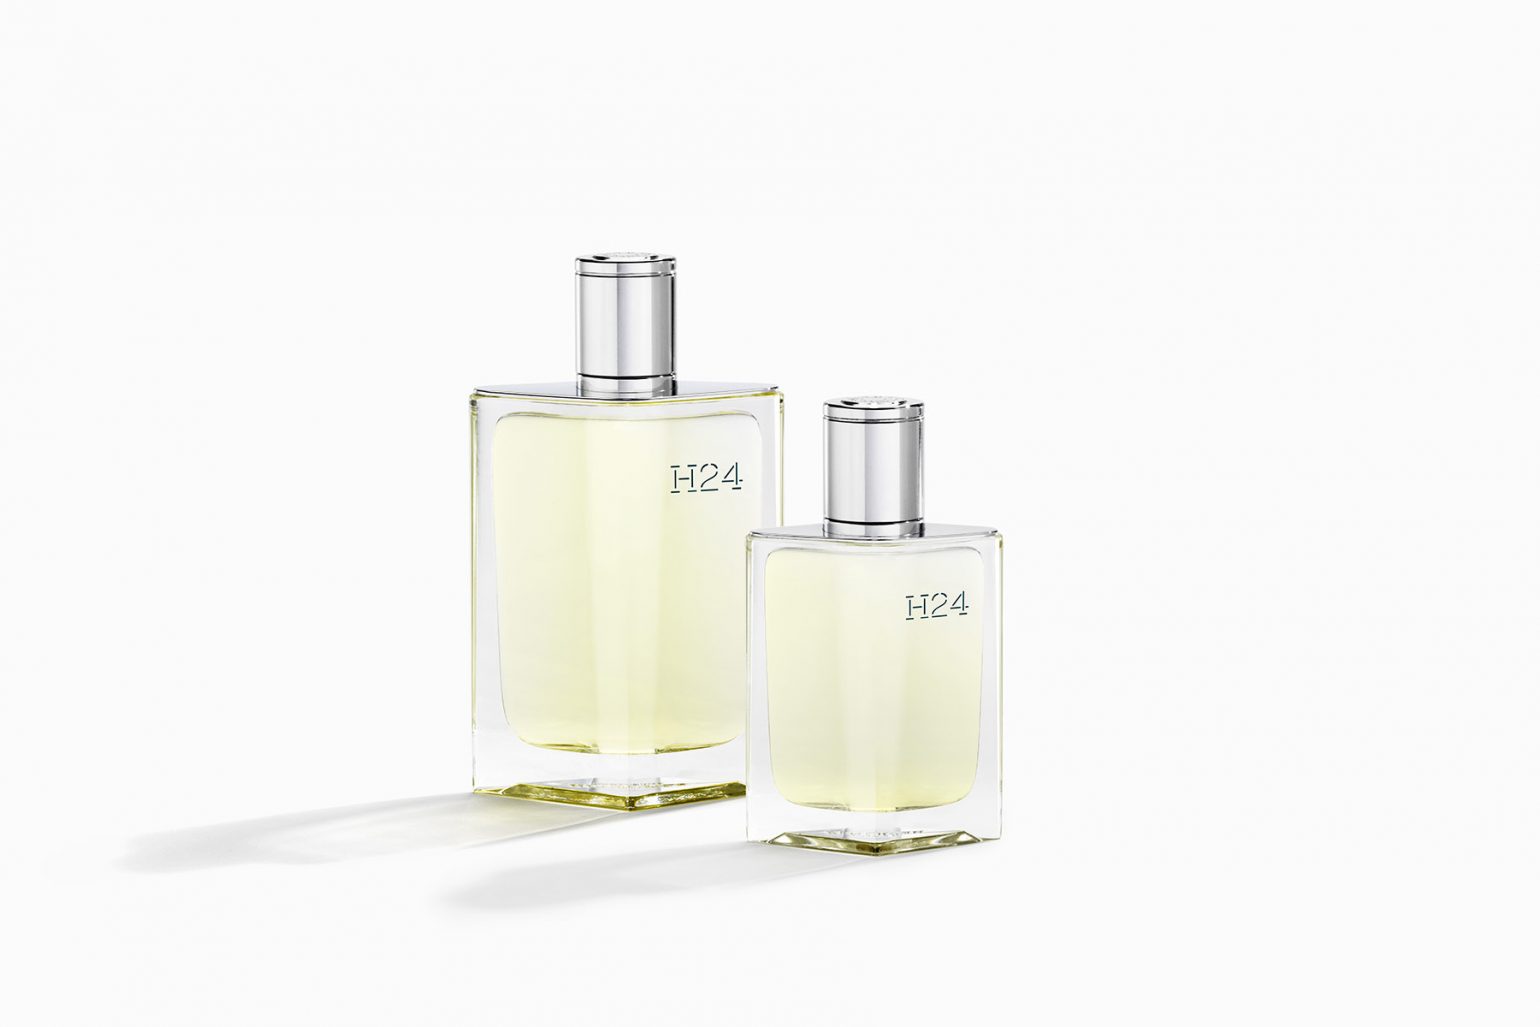 Hermès redefines men’s scents with new, steamy signature H24 fragrance